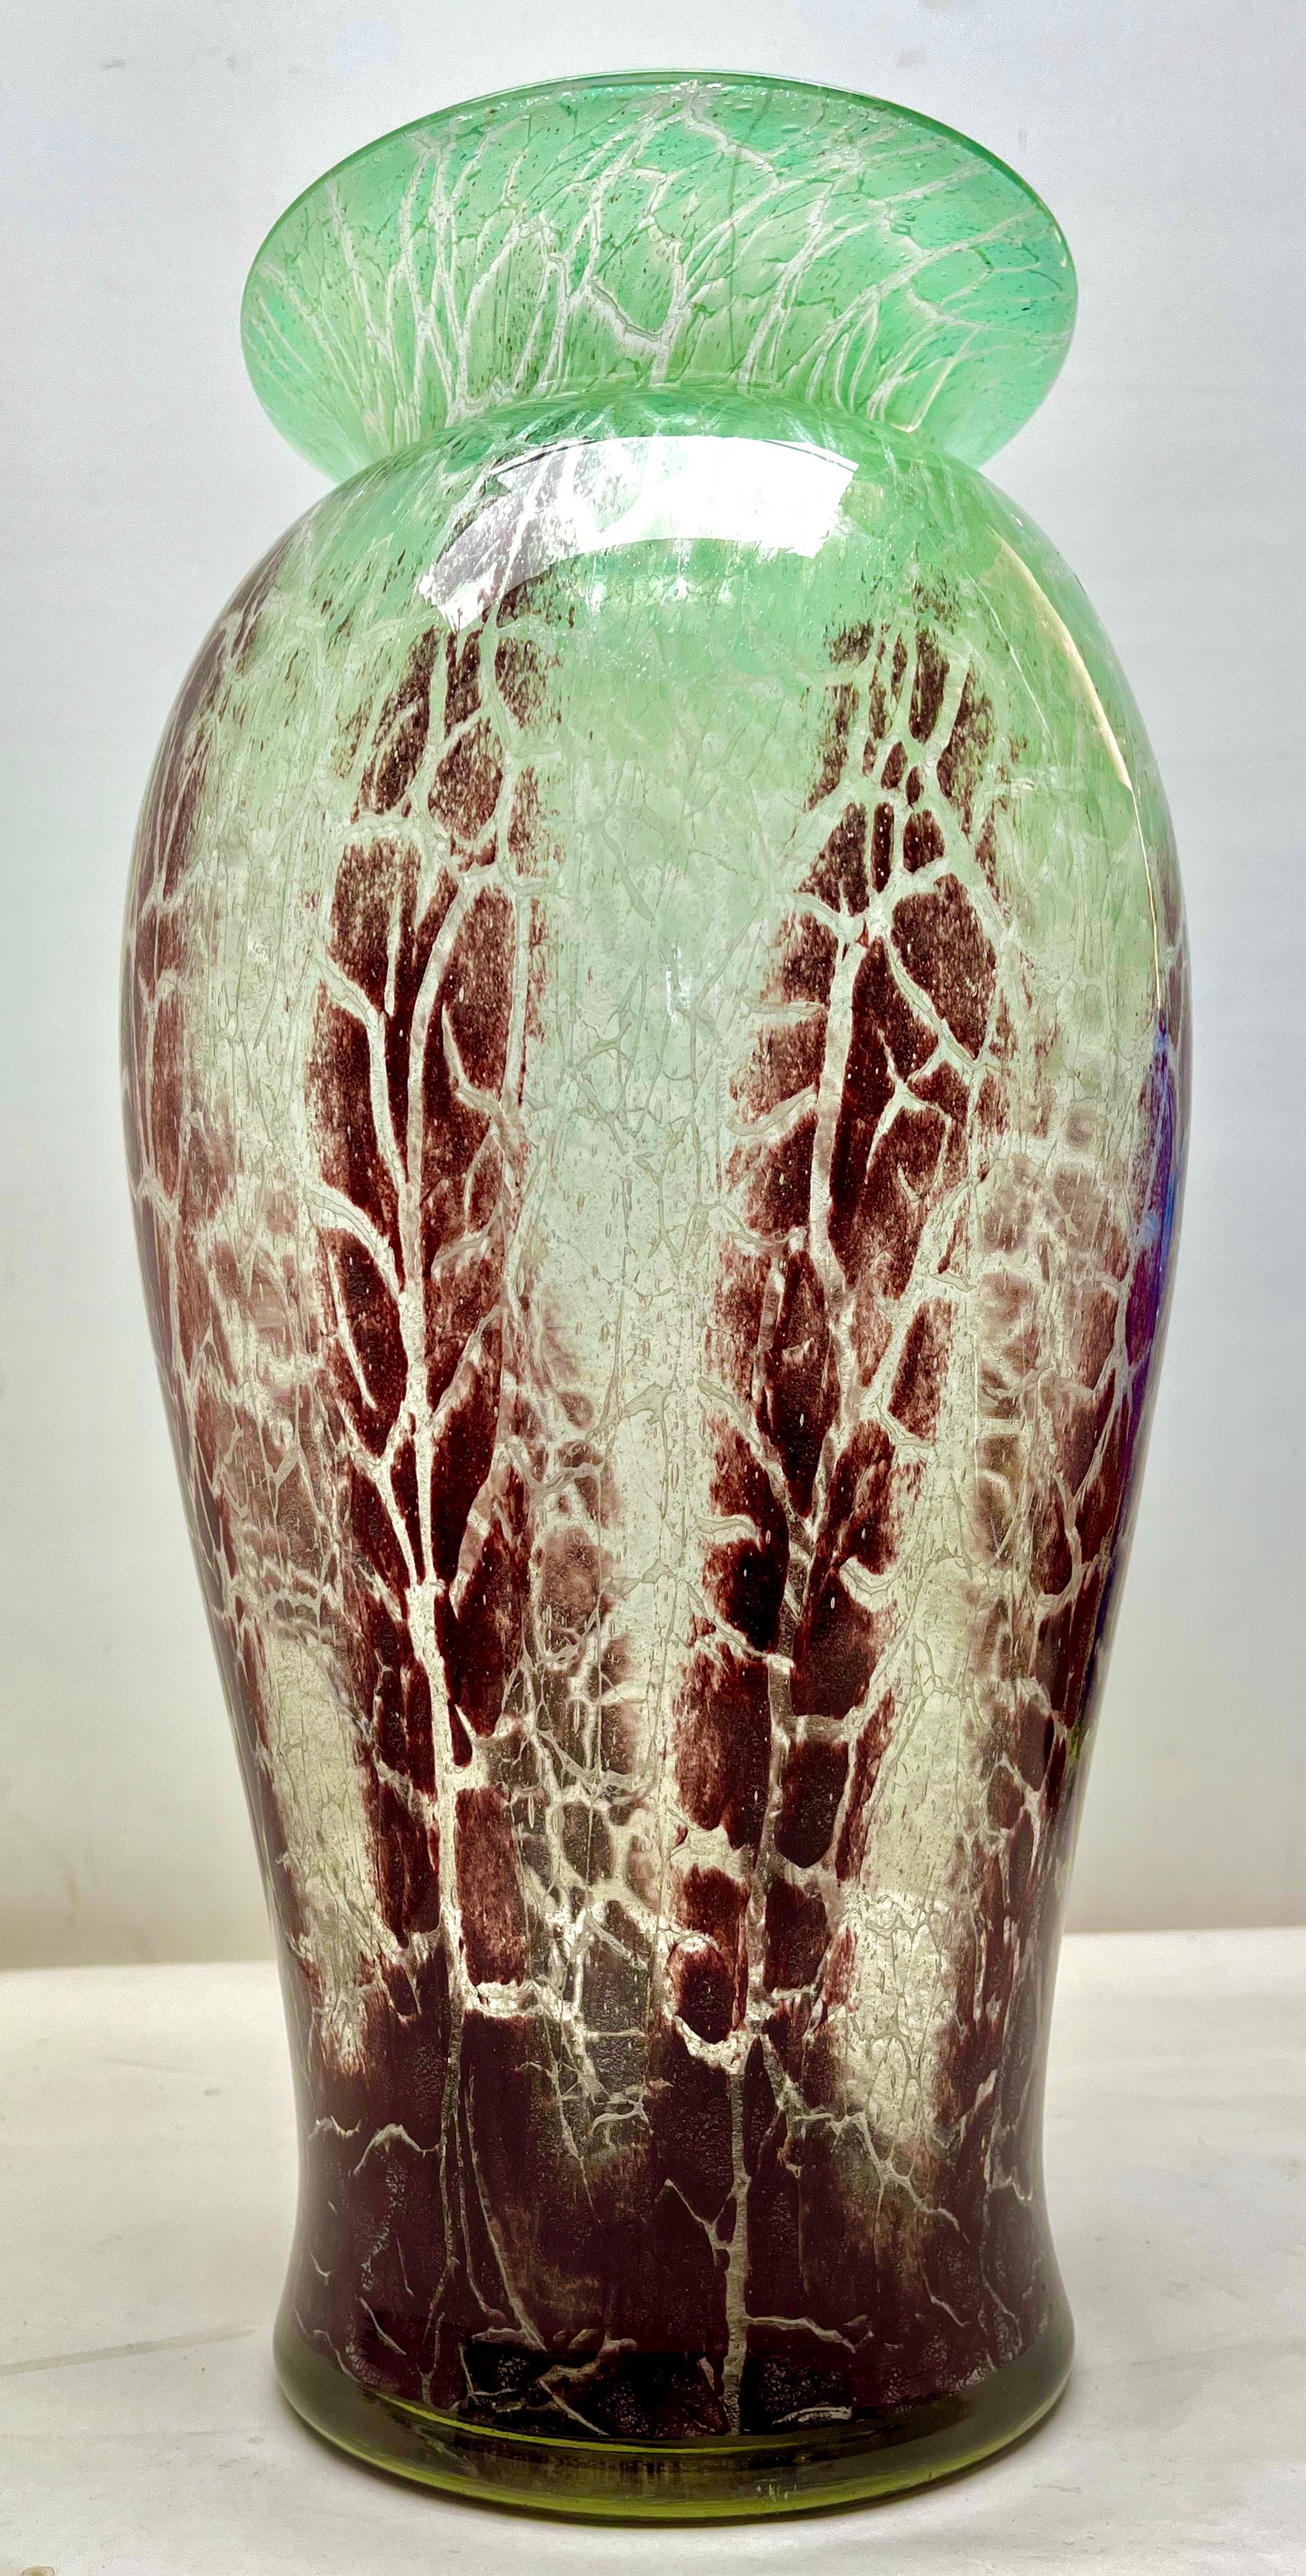 20th Century 'Ikora' Large Art Glass Vase, Produced by WMF in Germany, 1930s by Karl Wiedmann